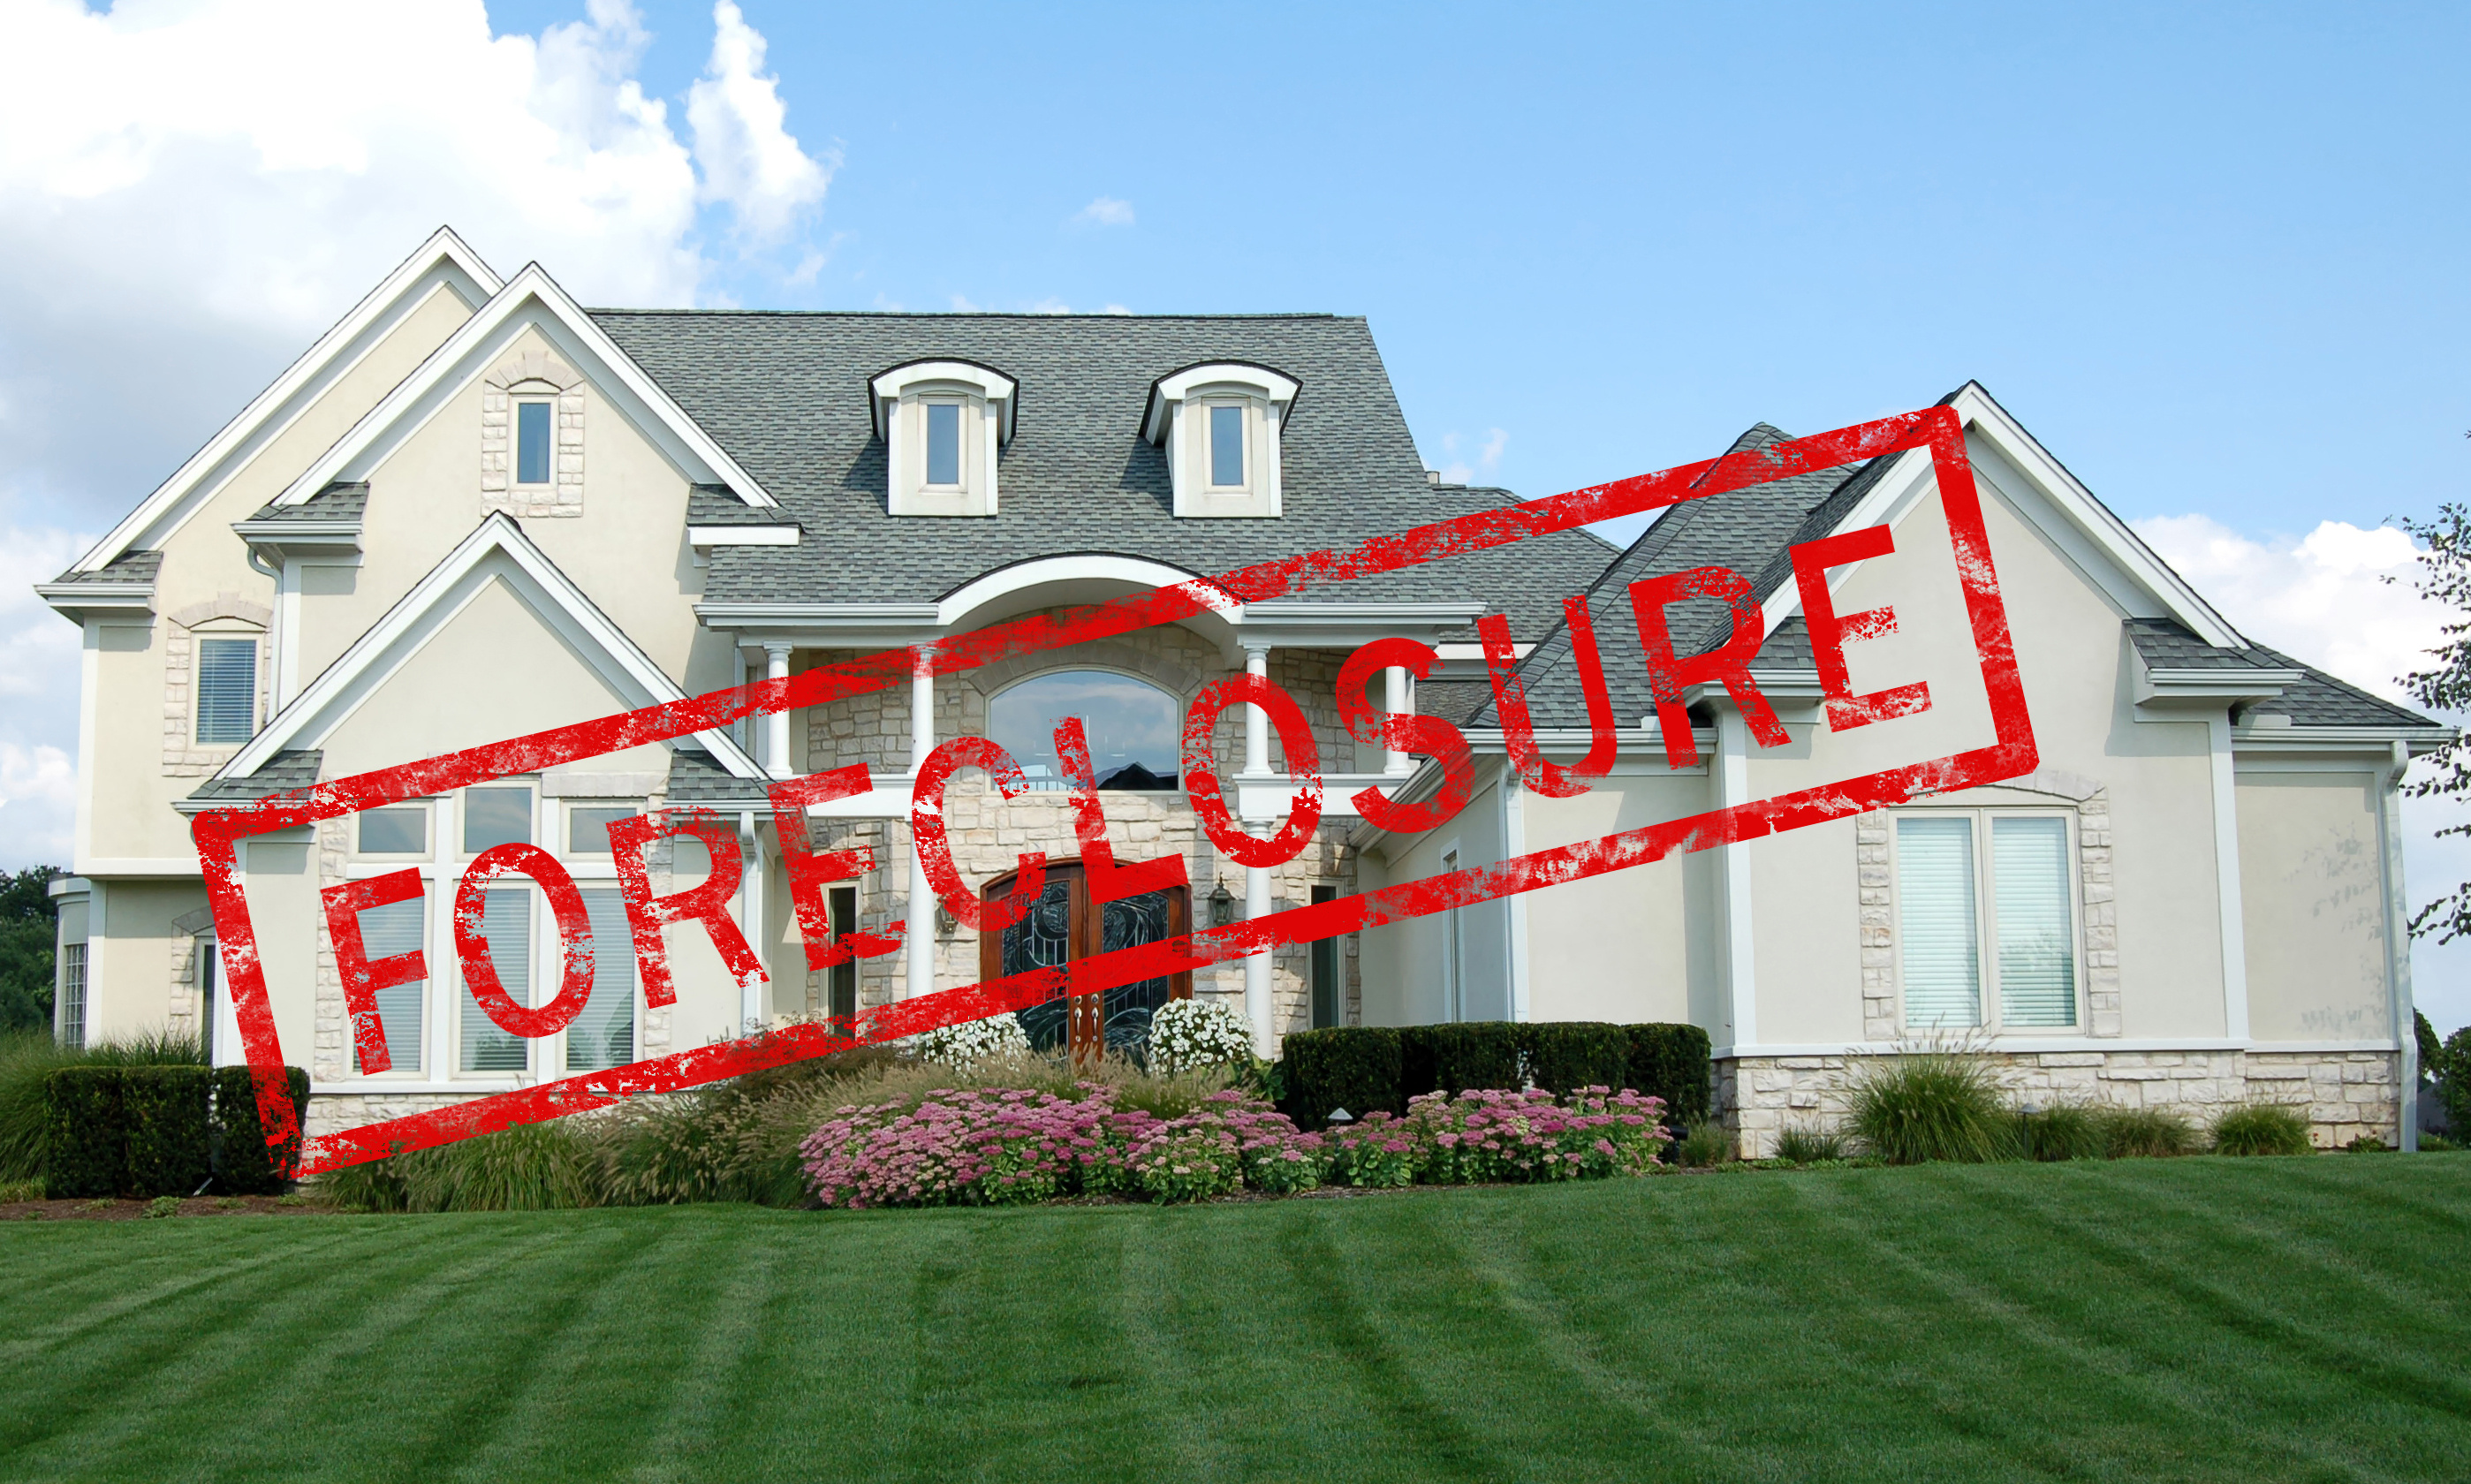 Call Dennis B. Thomas when you need valuations regarding Duval foreclosures